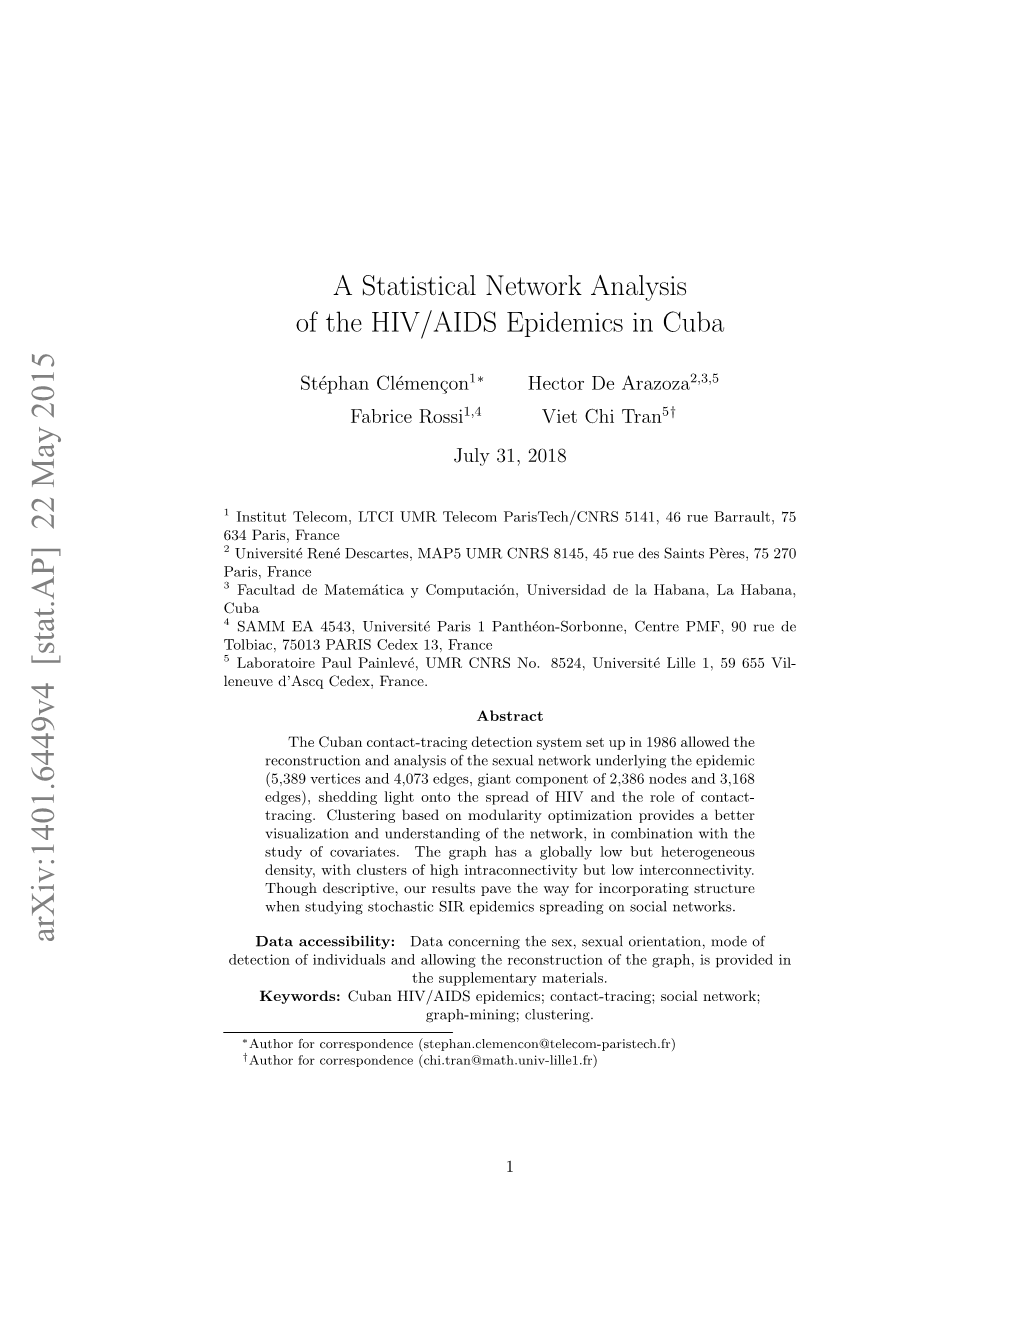 A Statistical Network Analysis of the HIV/AIDS Epidemics in Cuba